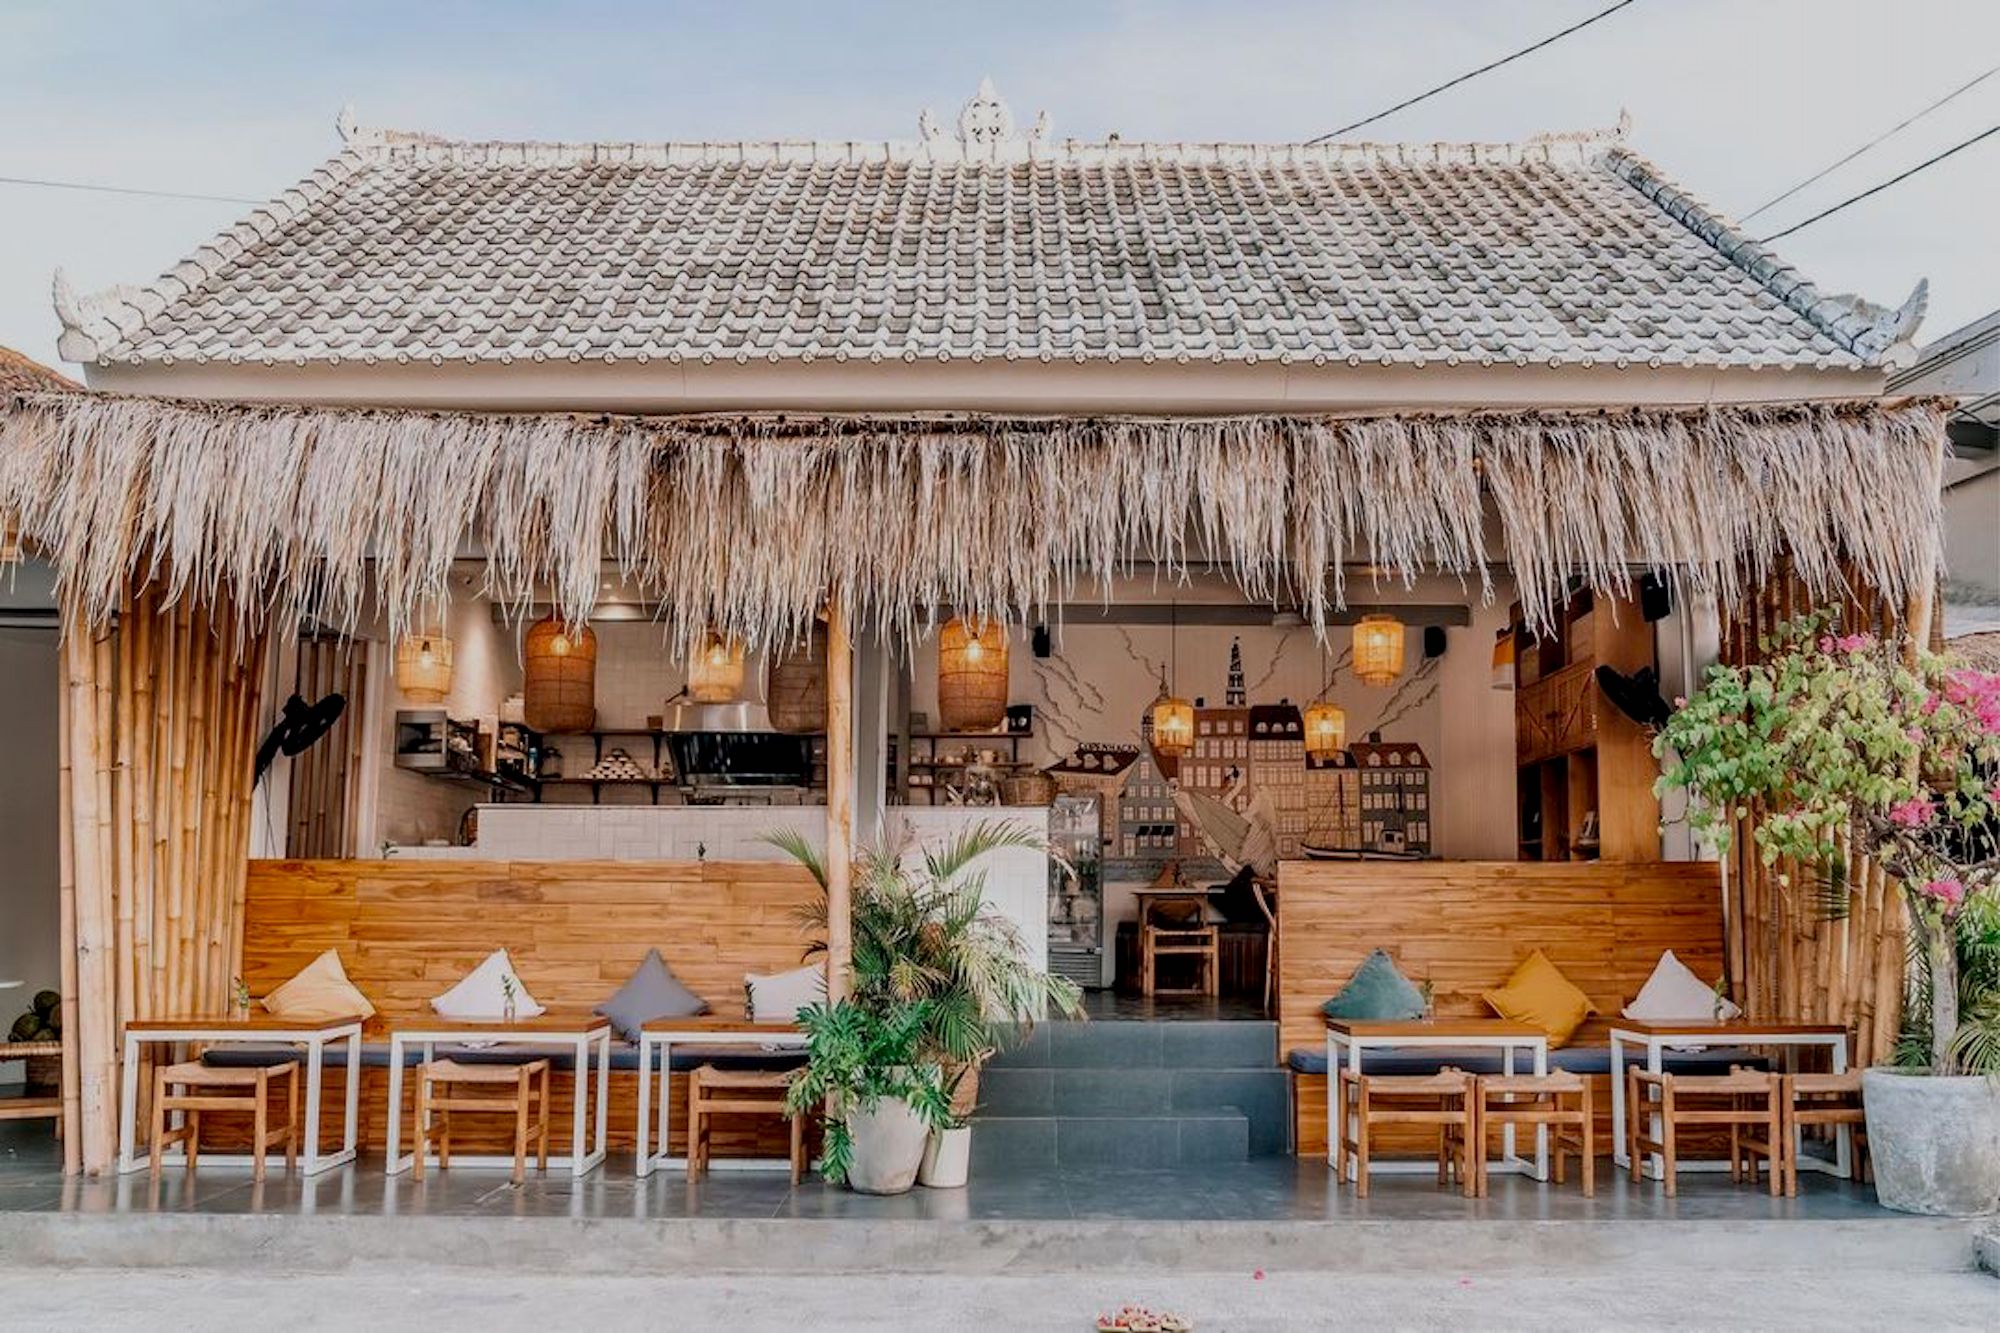 Bali's Cutest Cafes to Get You Bali Dreaming | Ministry of Villas